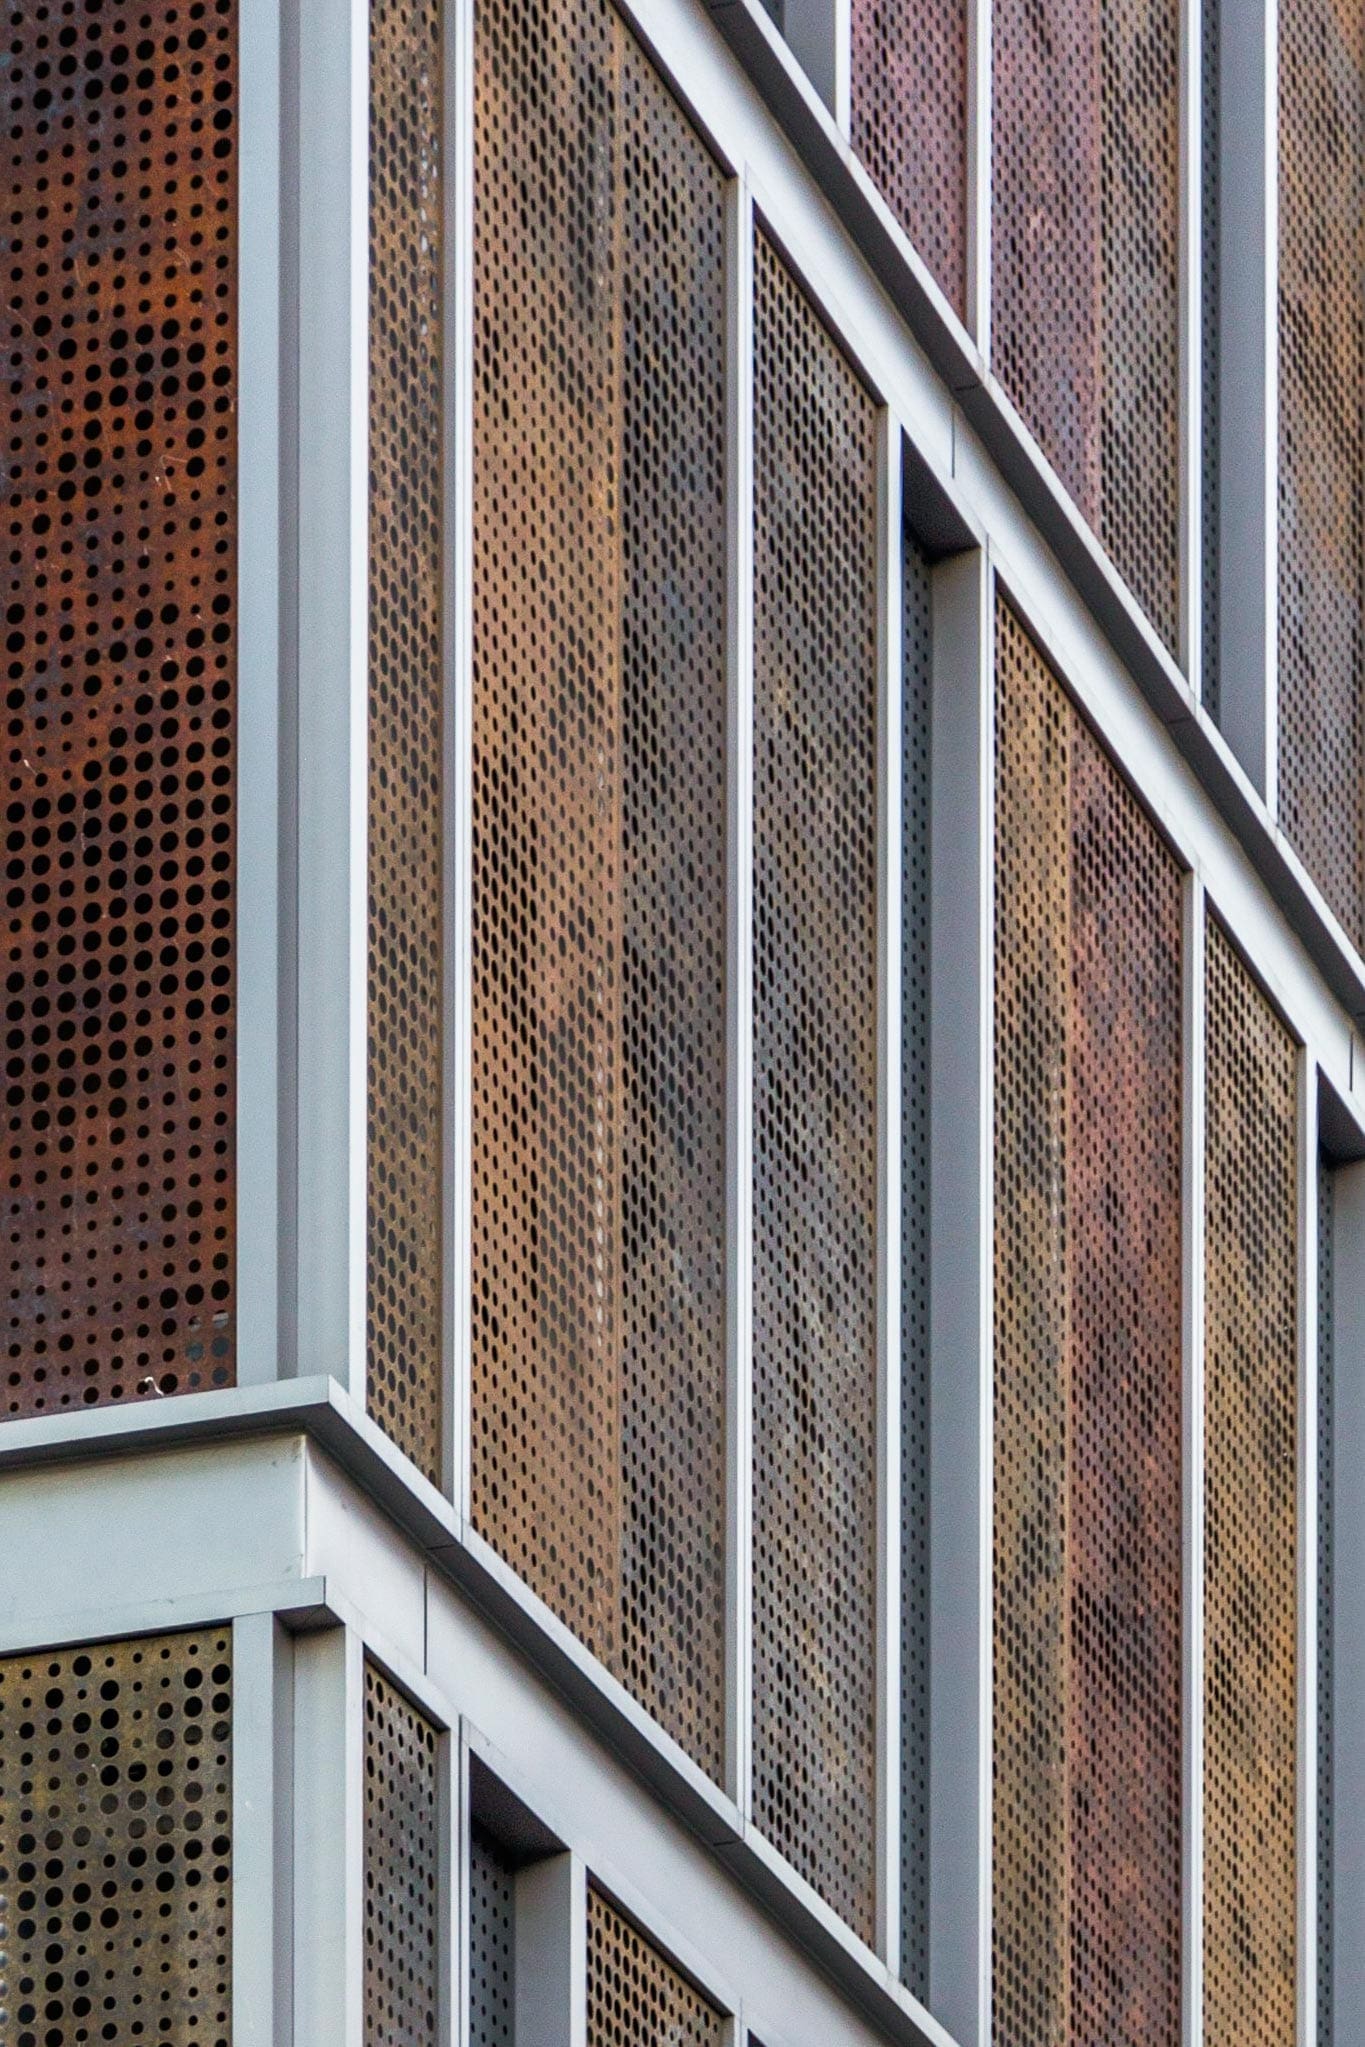 Detail of the perforated metal facade for Children's Hospital.